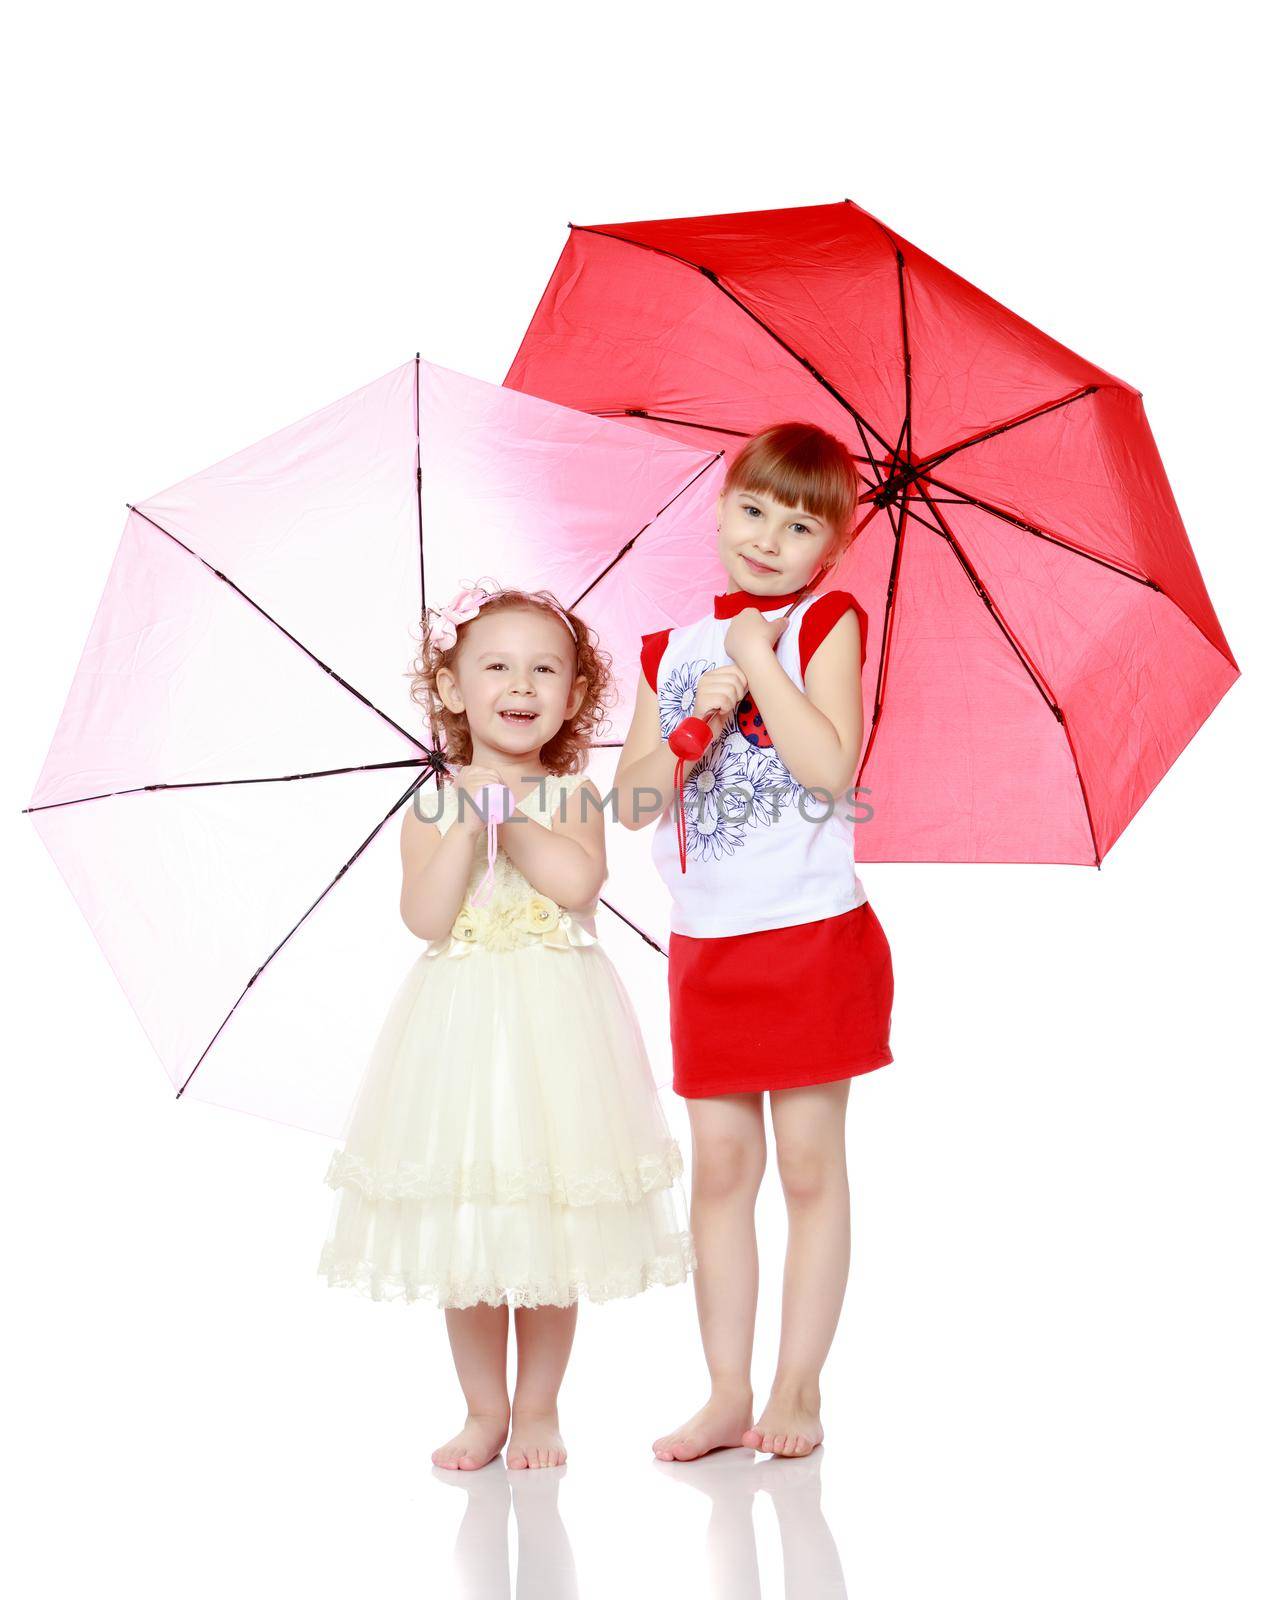 Two charming little girls, little sister and the eldest, sheltered from rain or sun under umbrellas.